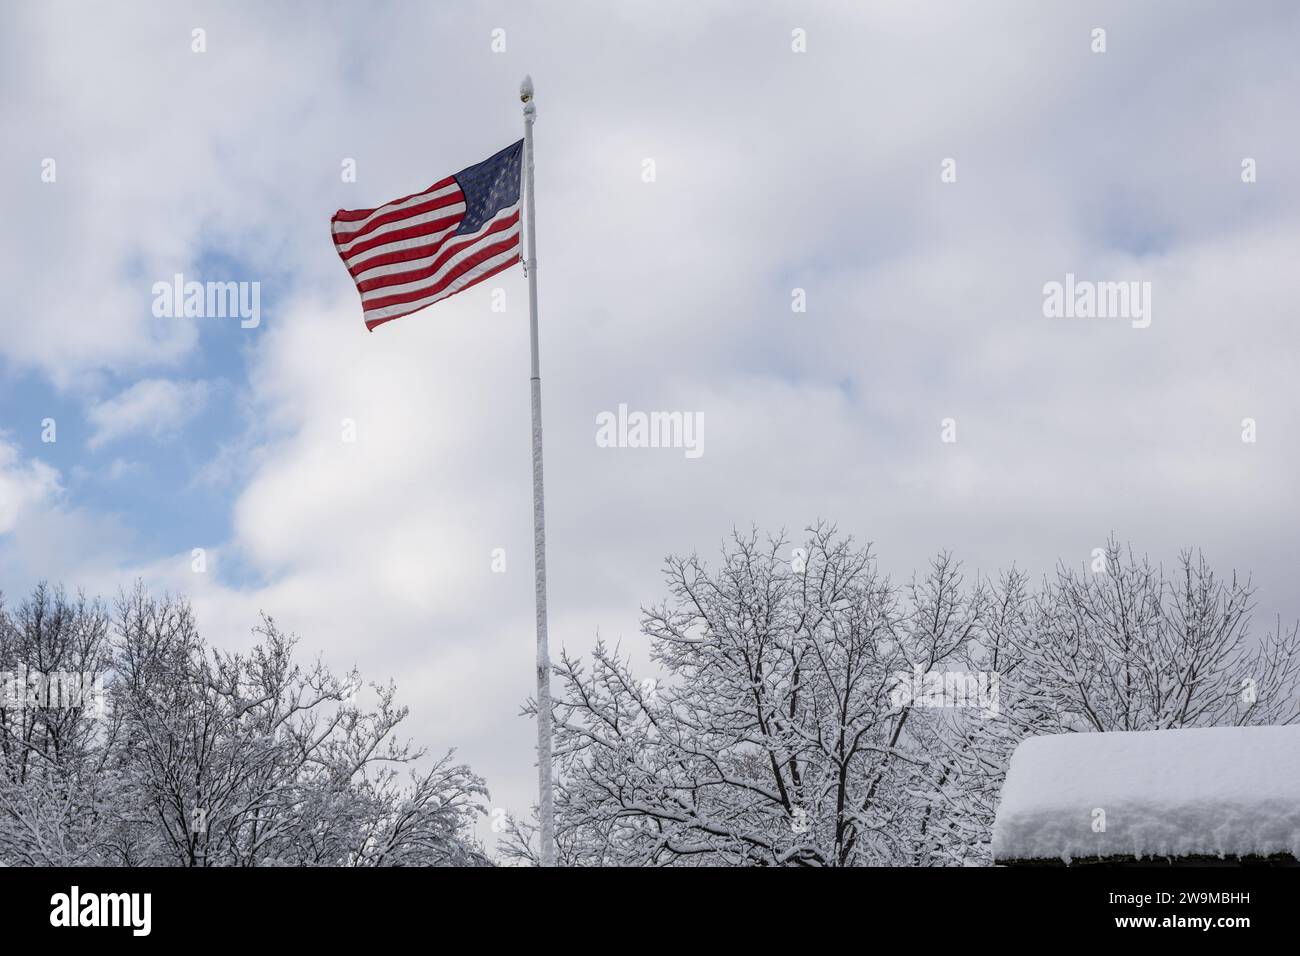 American Flag flies over snow covered trees in wintery landscape. Stock Photo